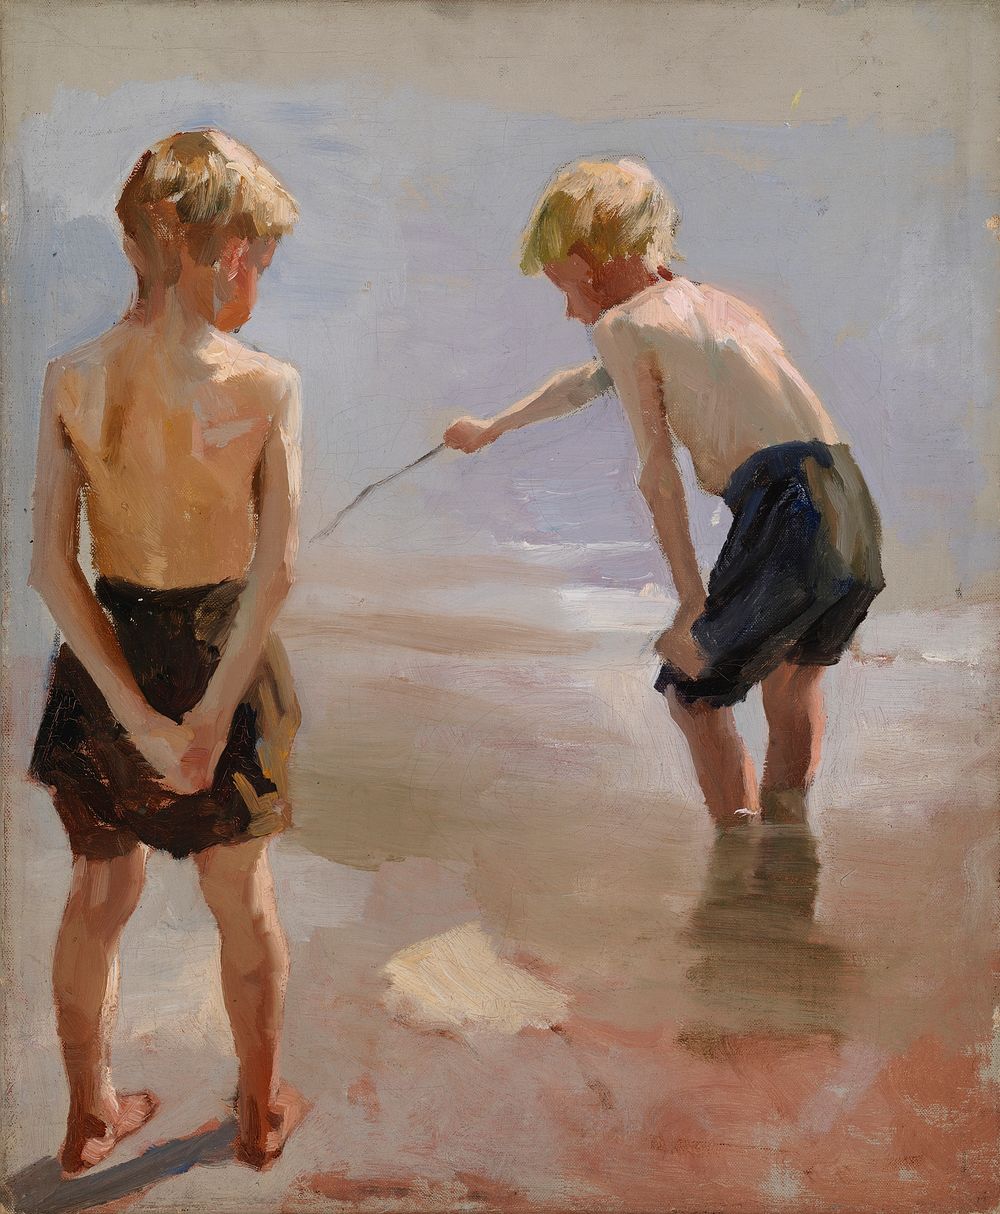 Boys playing on the shore, study, 1884, by Albert Edelfelt